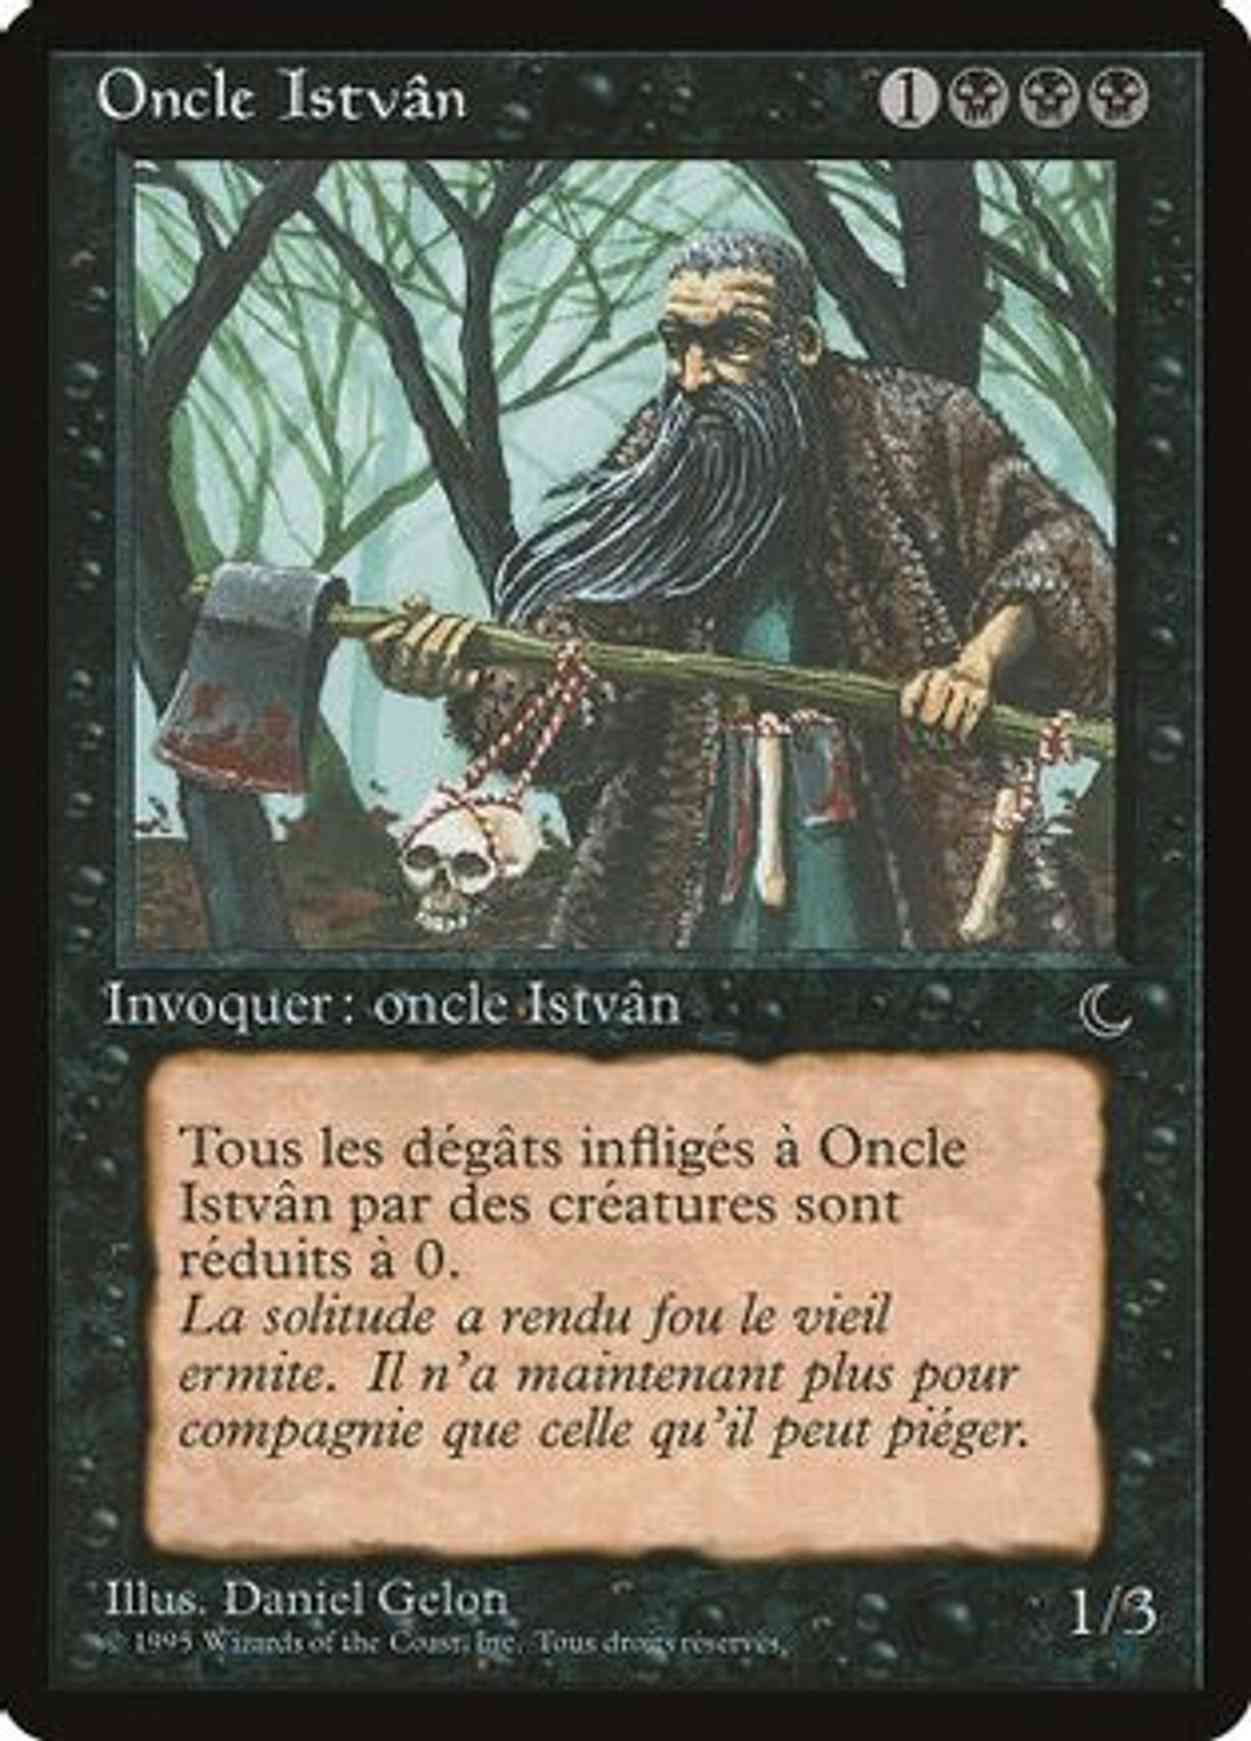 Uncle Istvan (French) - "Oncle Istavan" magic card front